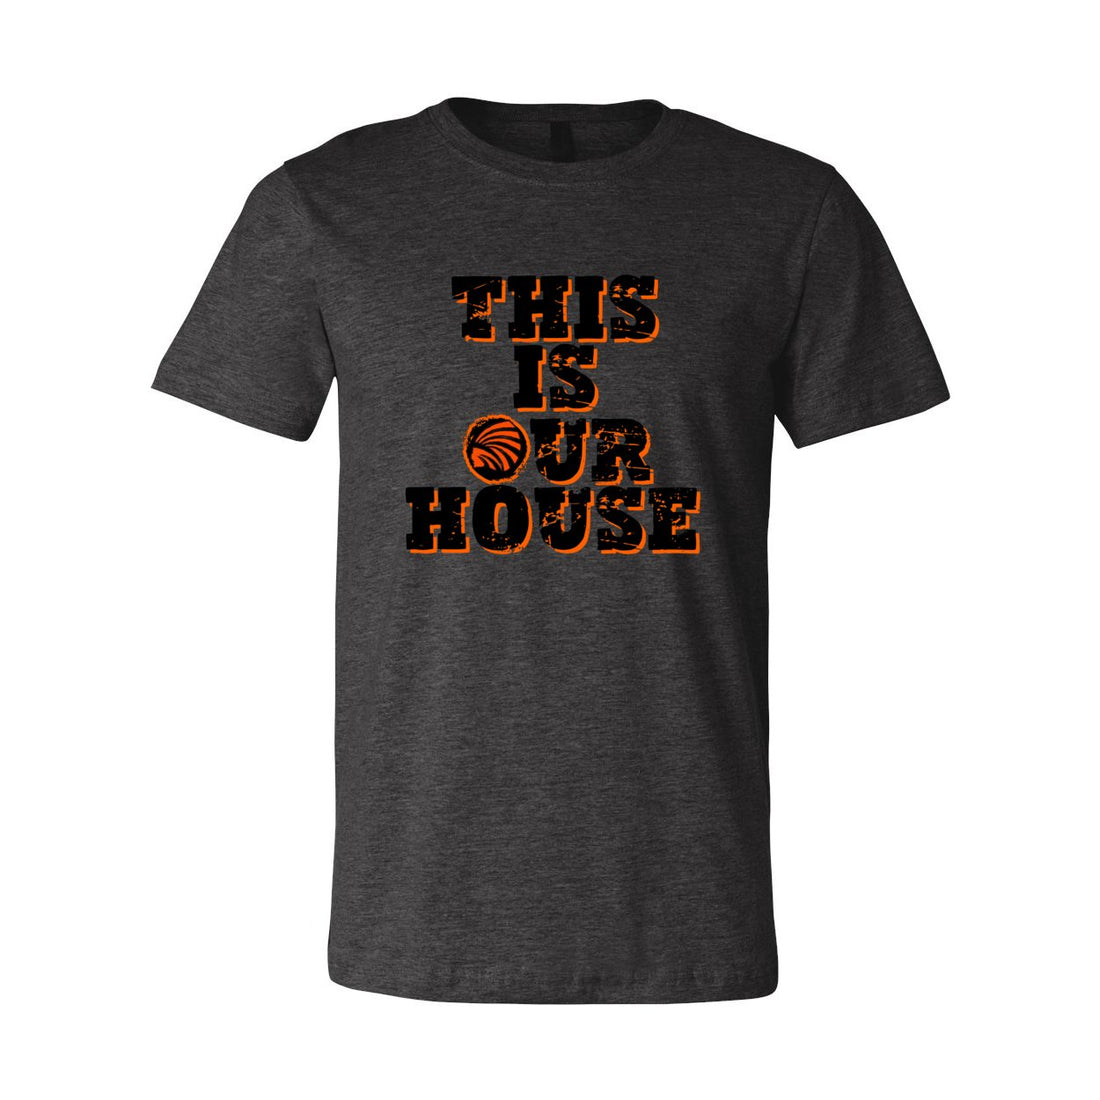 Our House Indians Short Sleeve Jersey Tee - T-Shirts - Positively Sassy - Our House Indians Short Sleeve Jersey Tee